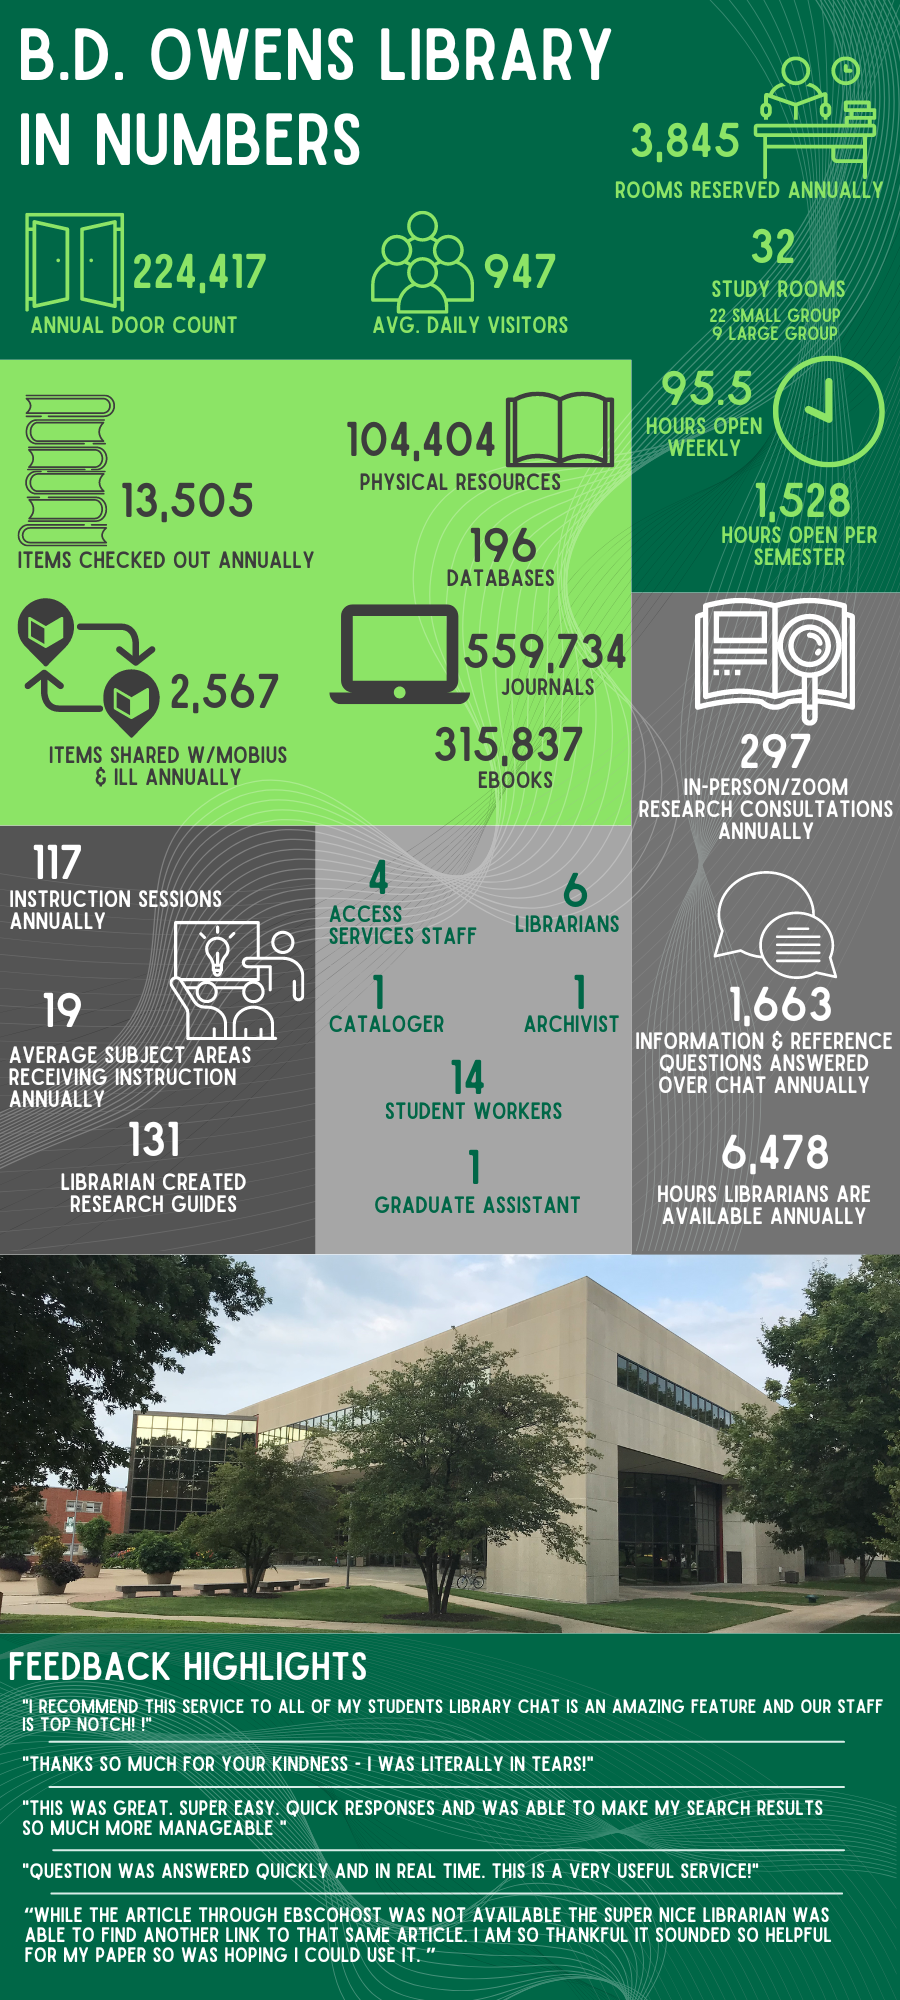 B.D. Owens Library by the numbers